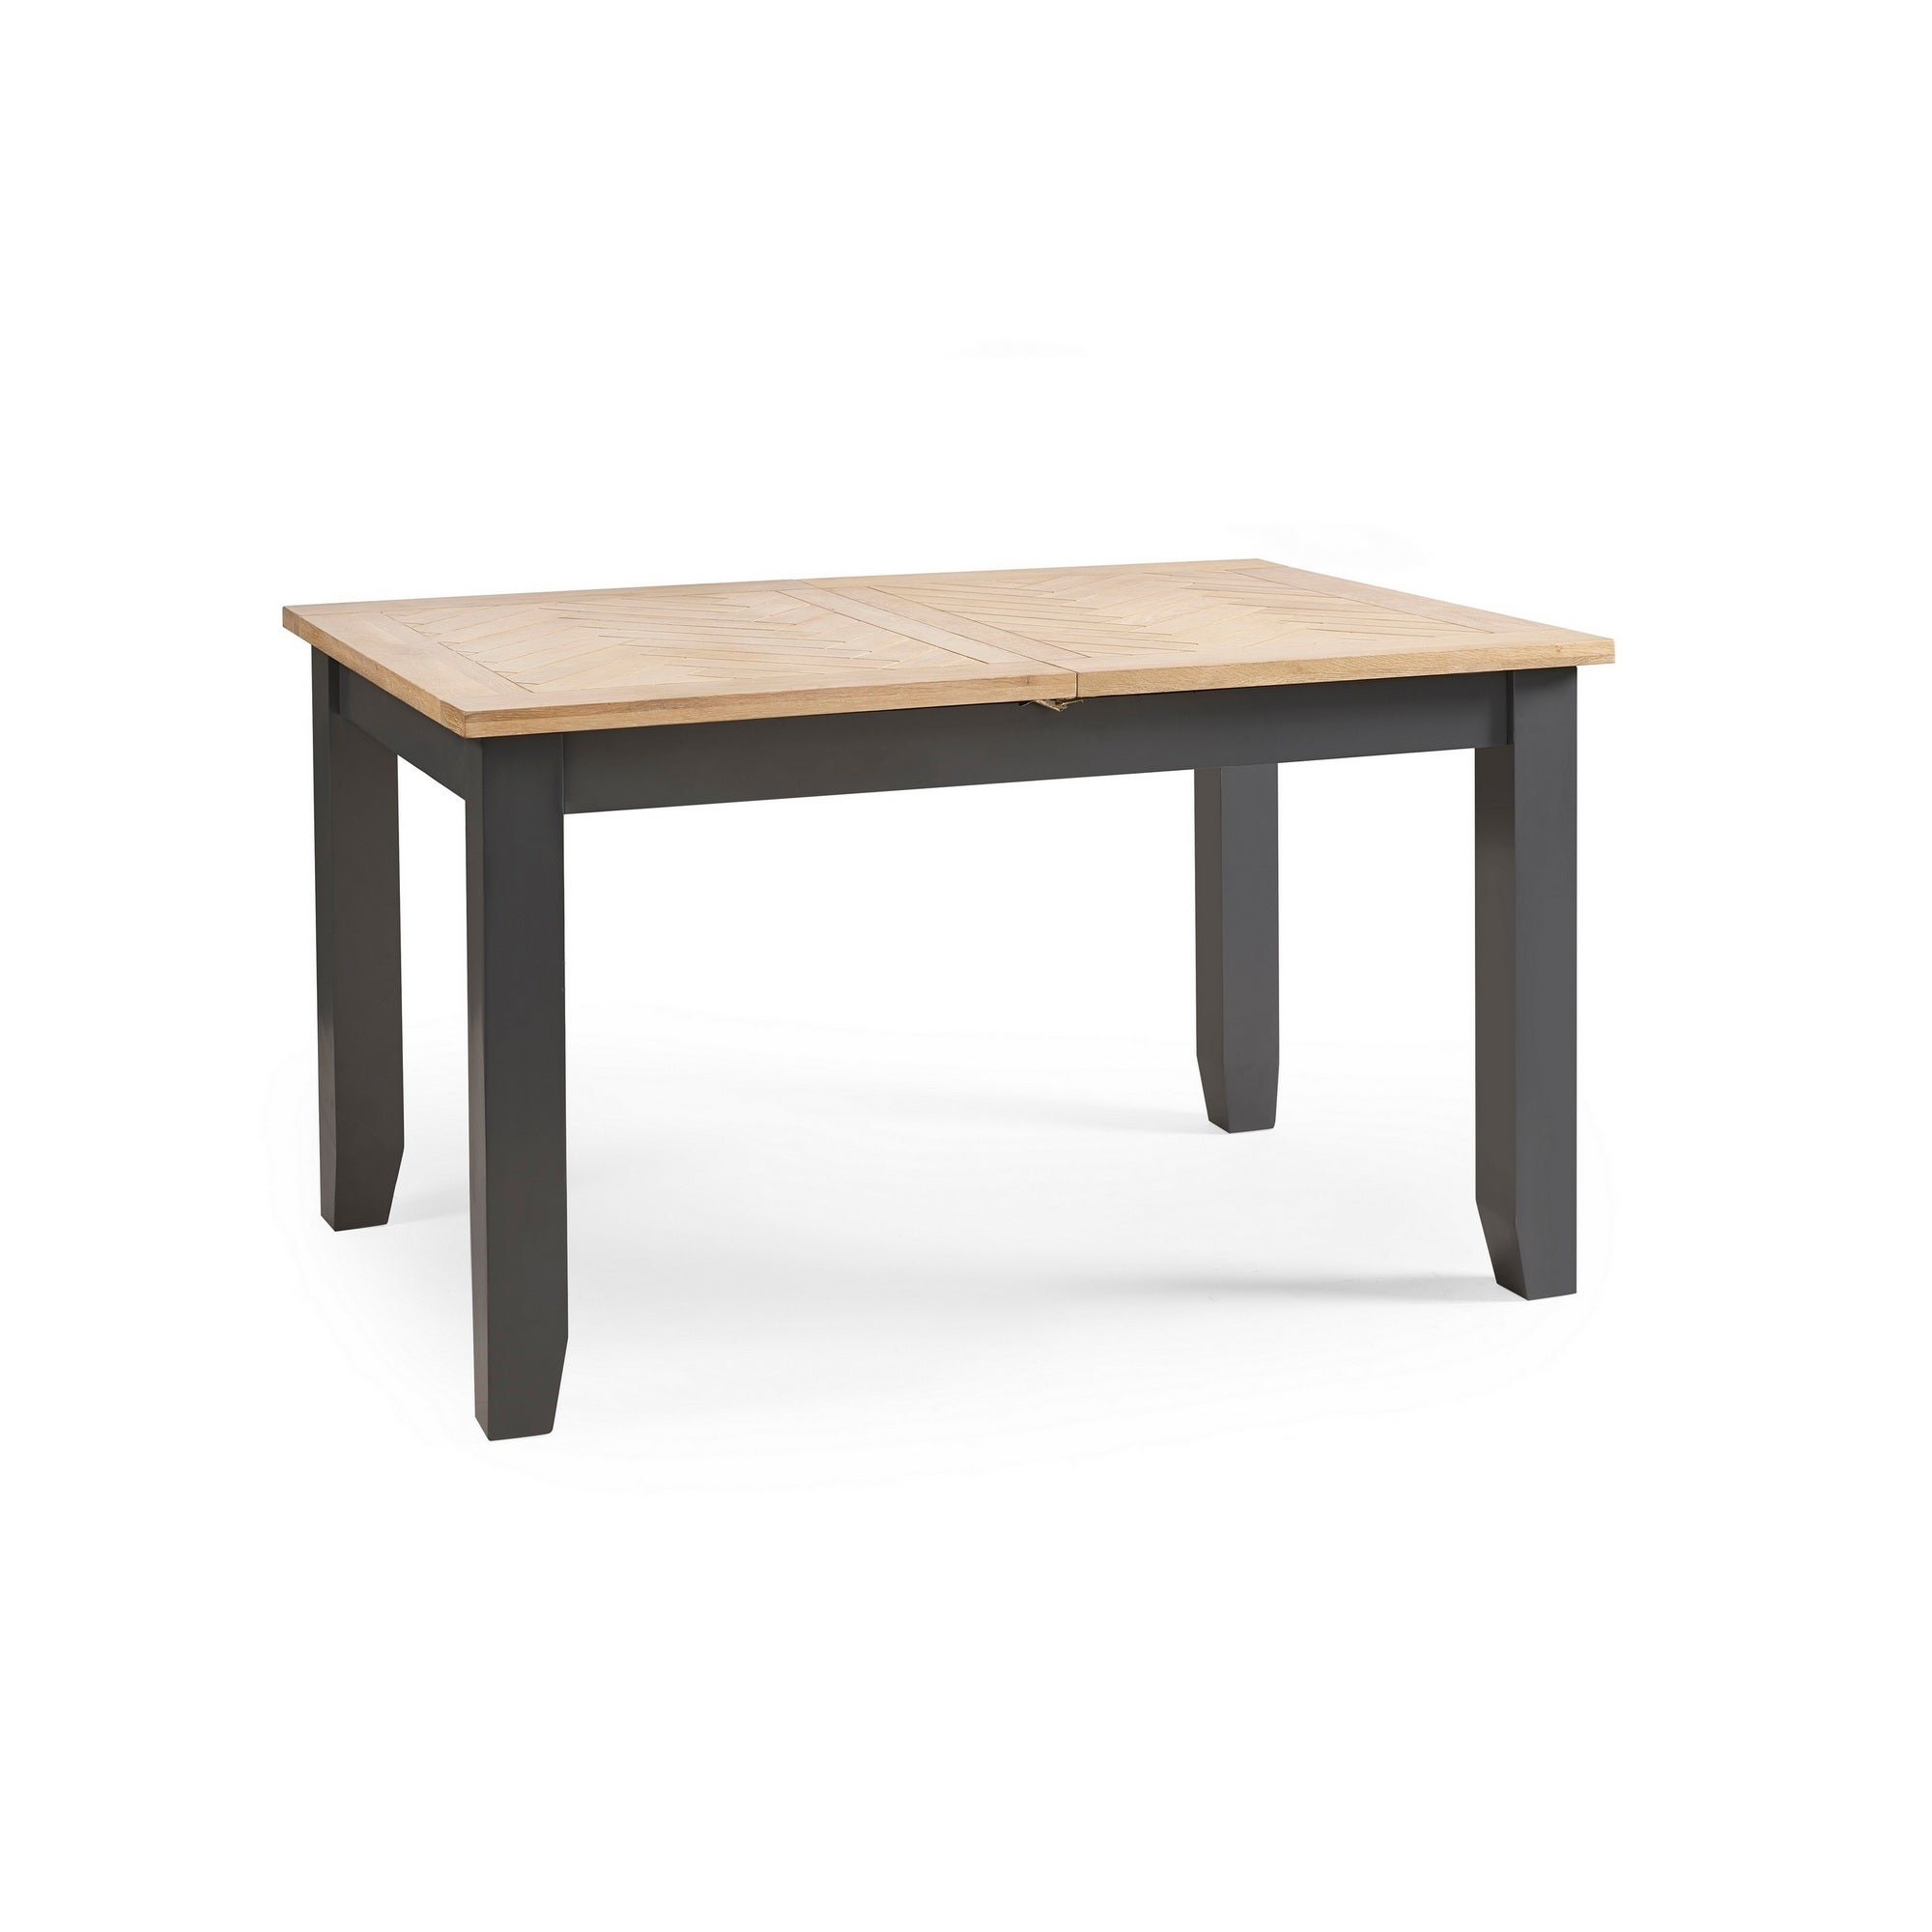 Bordeaux 6 Seater Rectangular Extendable Dining Table, Solid Oak Grey